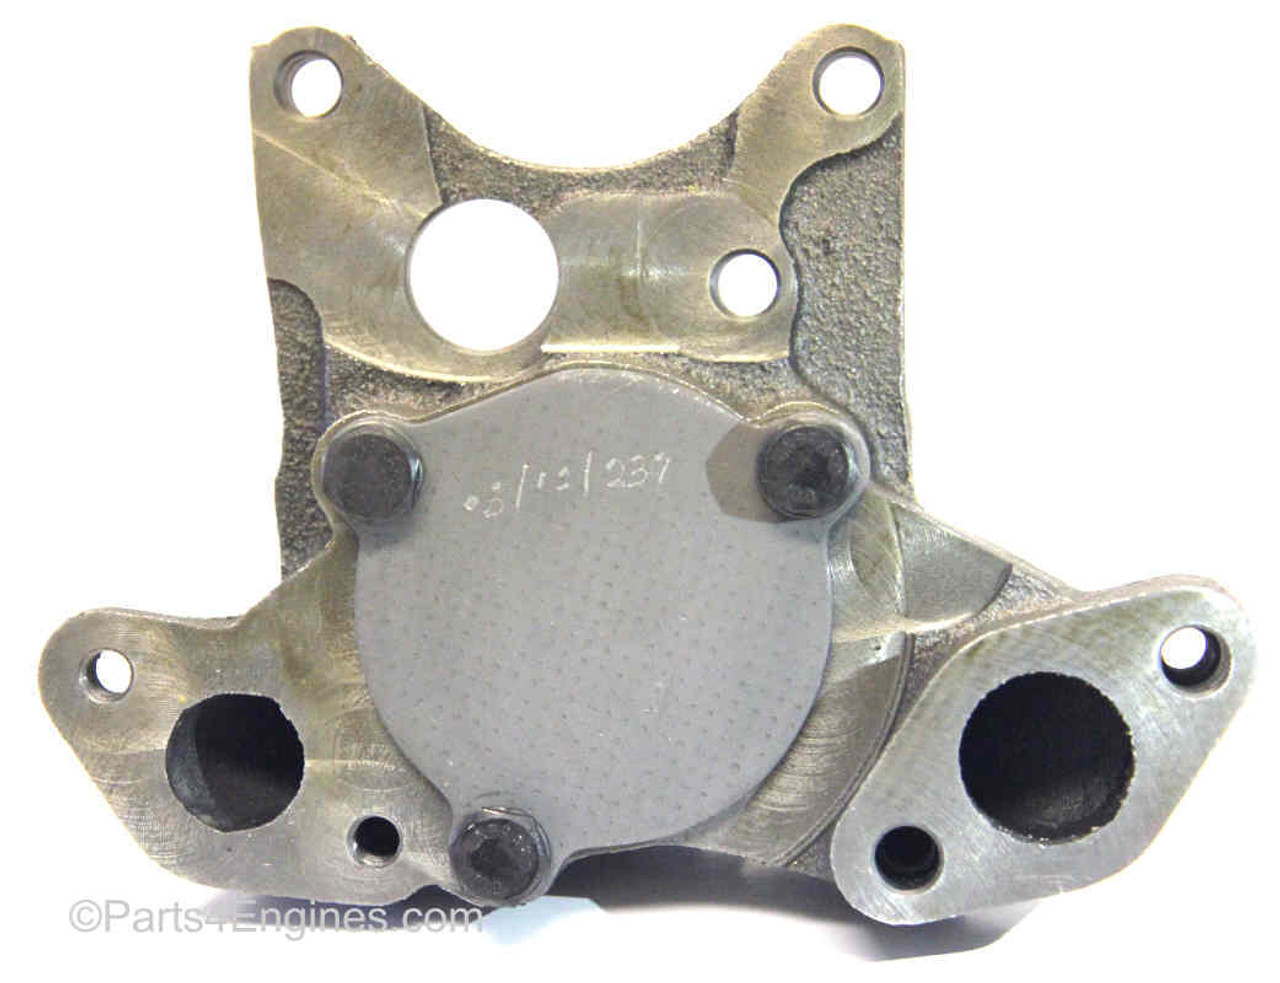 Perkins Phaser 1004 oil pump from parts4engines.com